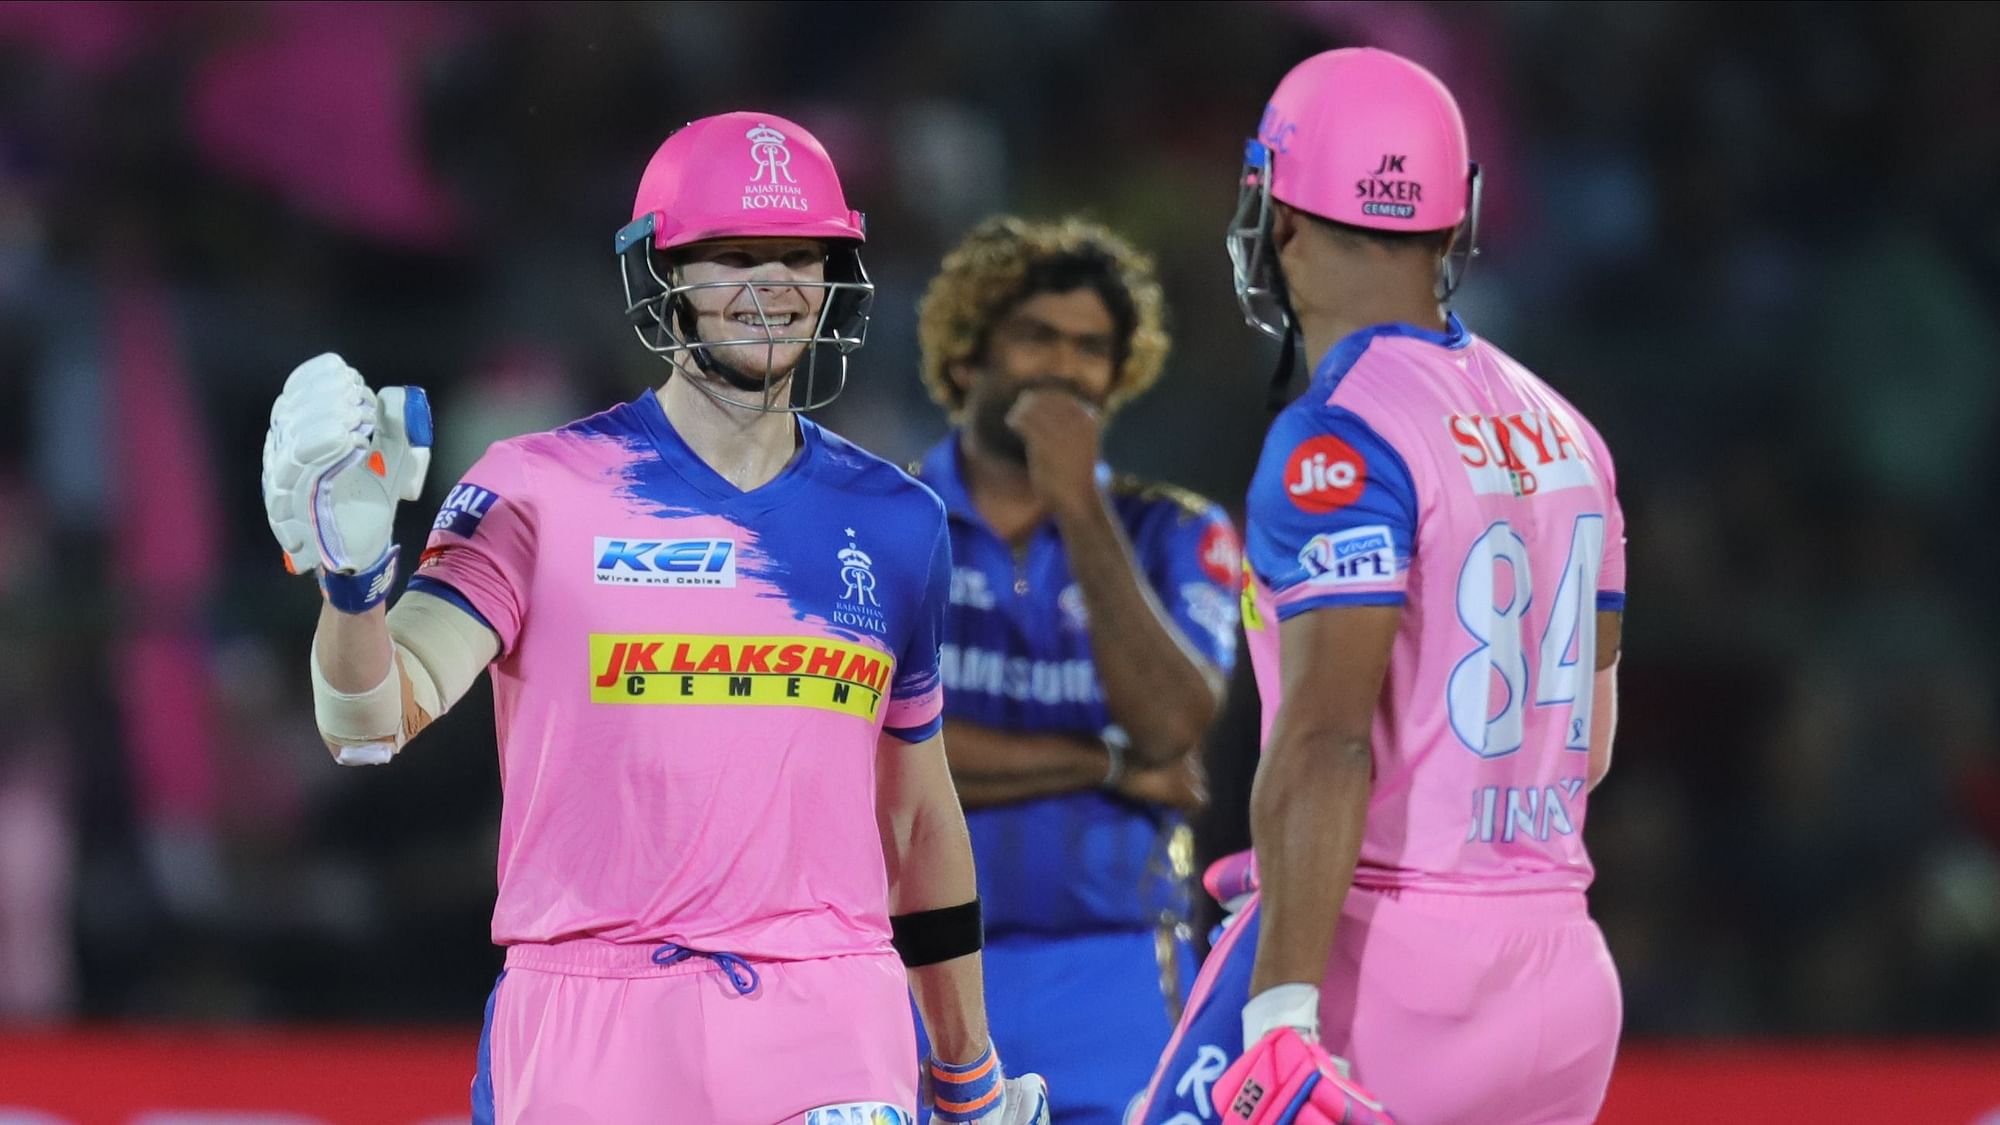 Steve Smith helped Rajasthan Royals beat Mumbai Indians by 5 wickets on 20 April.